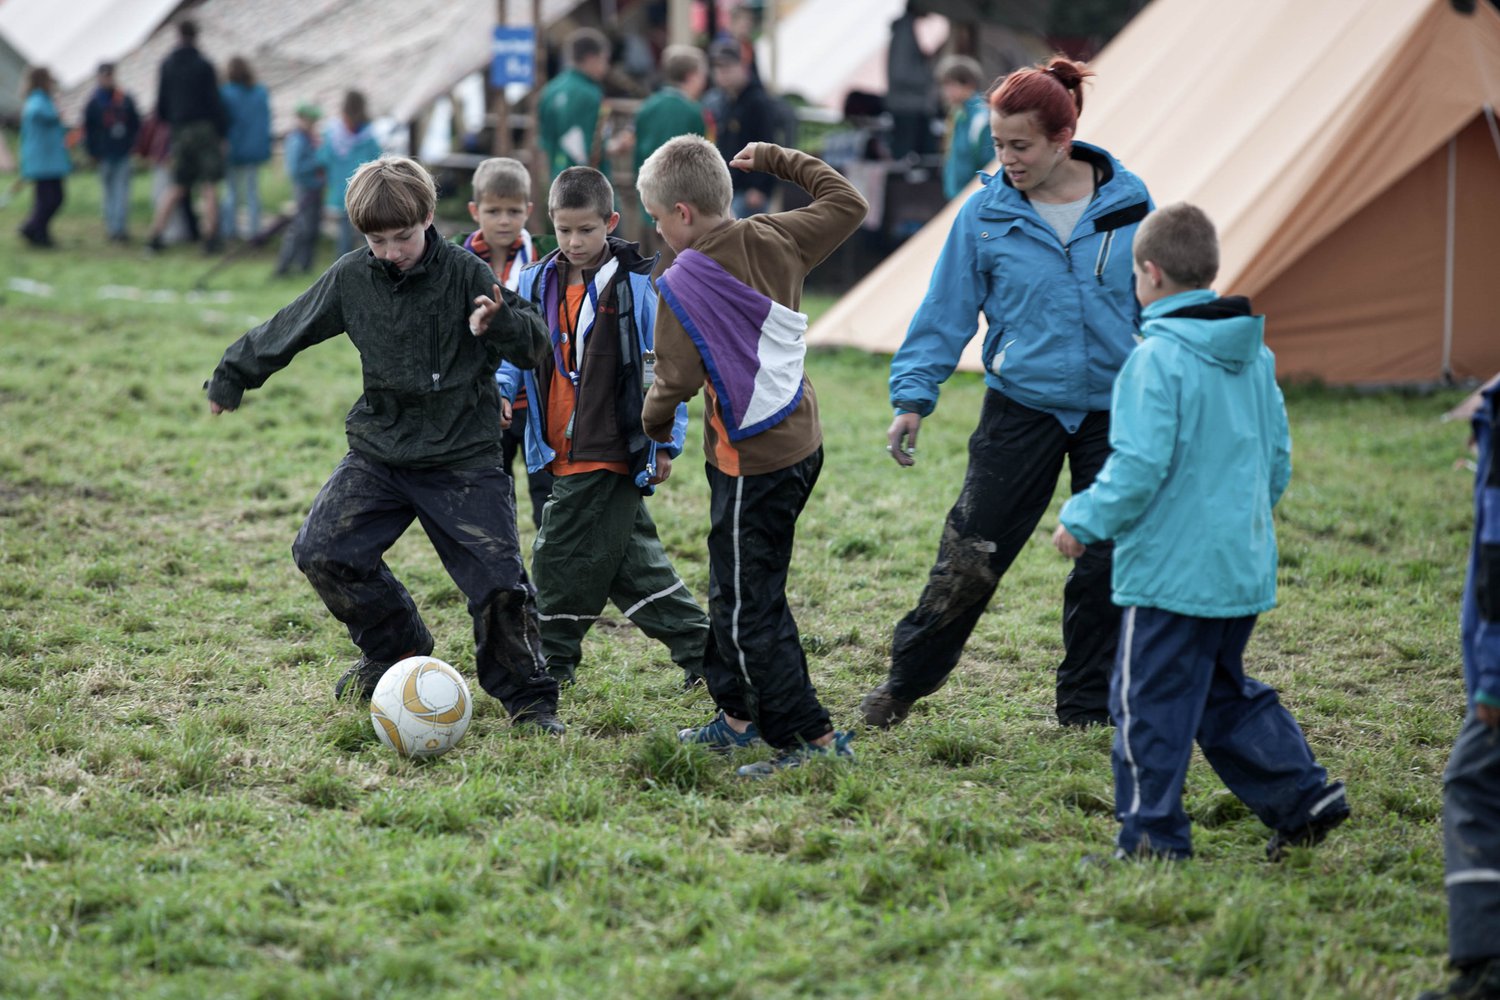 Scouts jouant au football